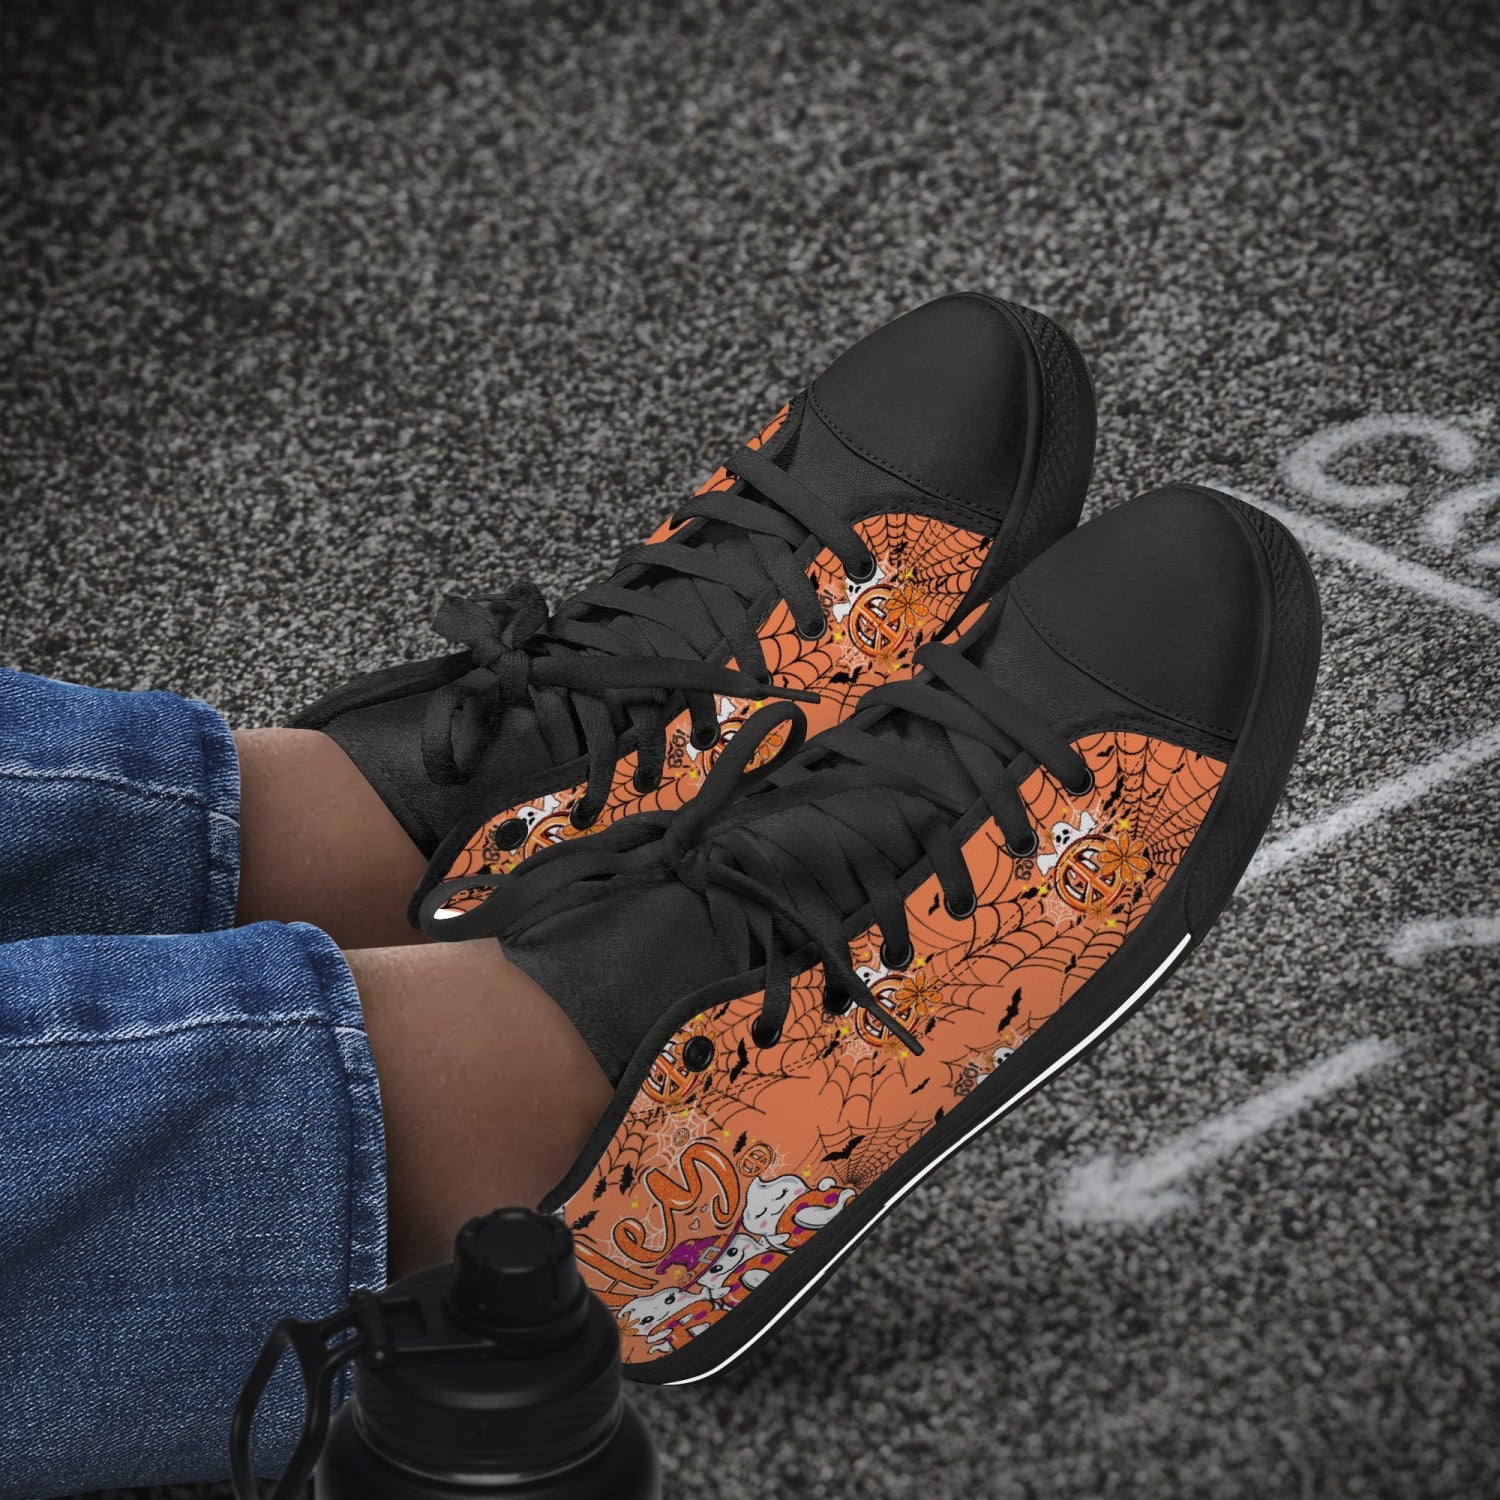 HEY BOO HALLOWEEN HIGH TOP CANVAS SHOES - TY0408234